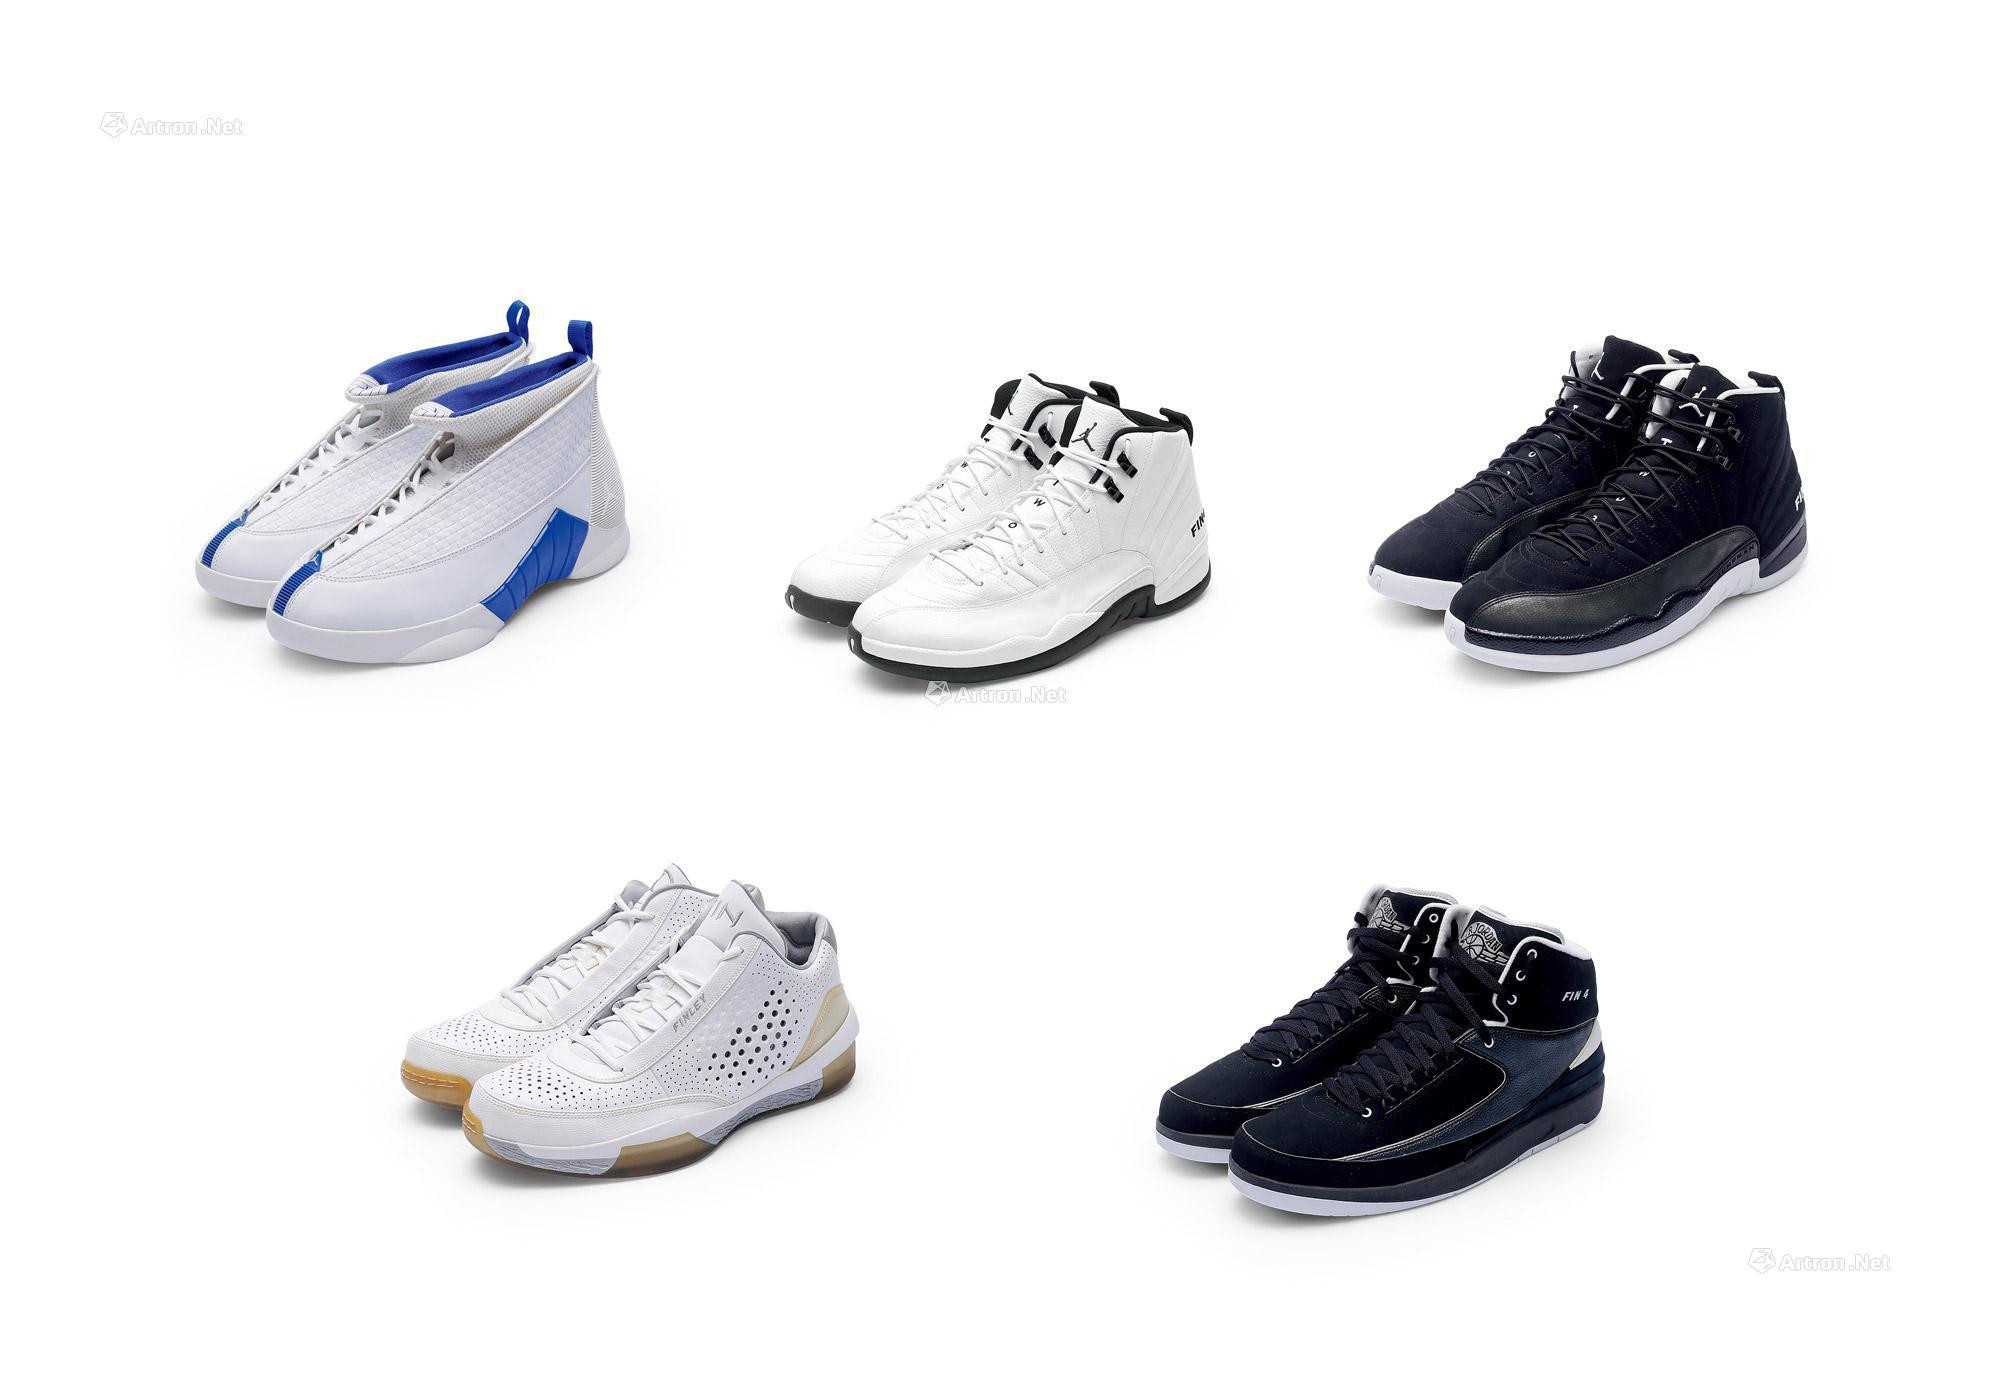 Michael Finley Exclusive Sneaker Collection  5 Pairs of Player Exclusive Sneakers